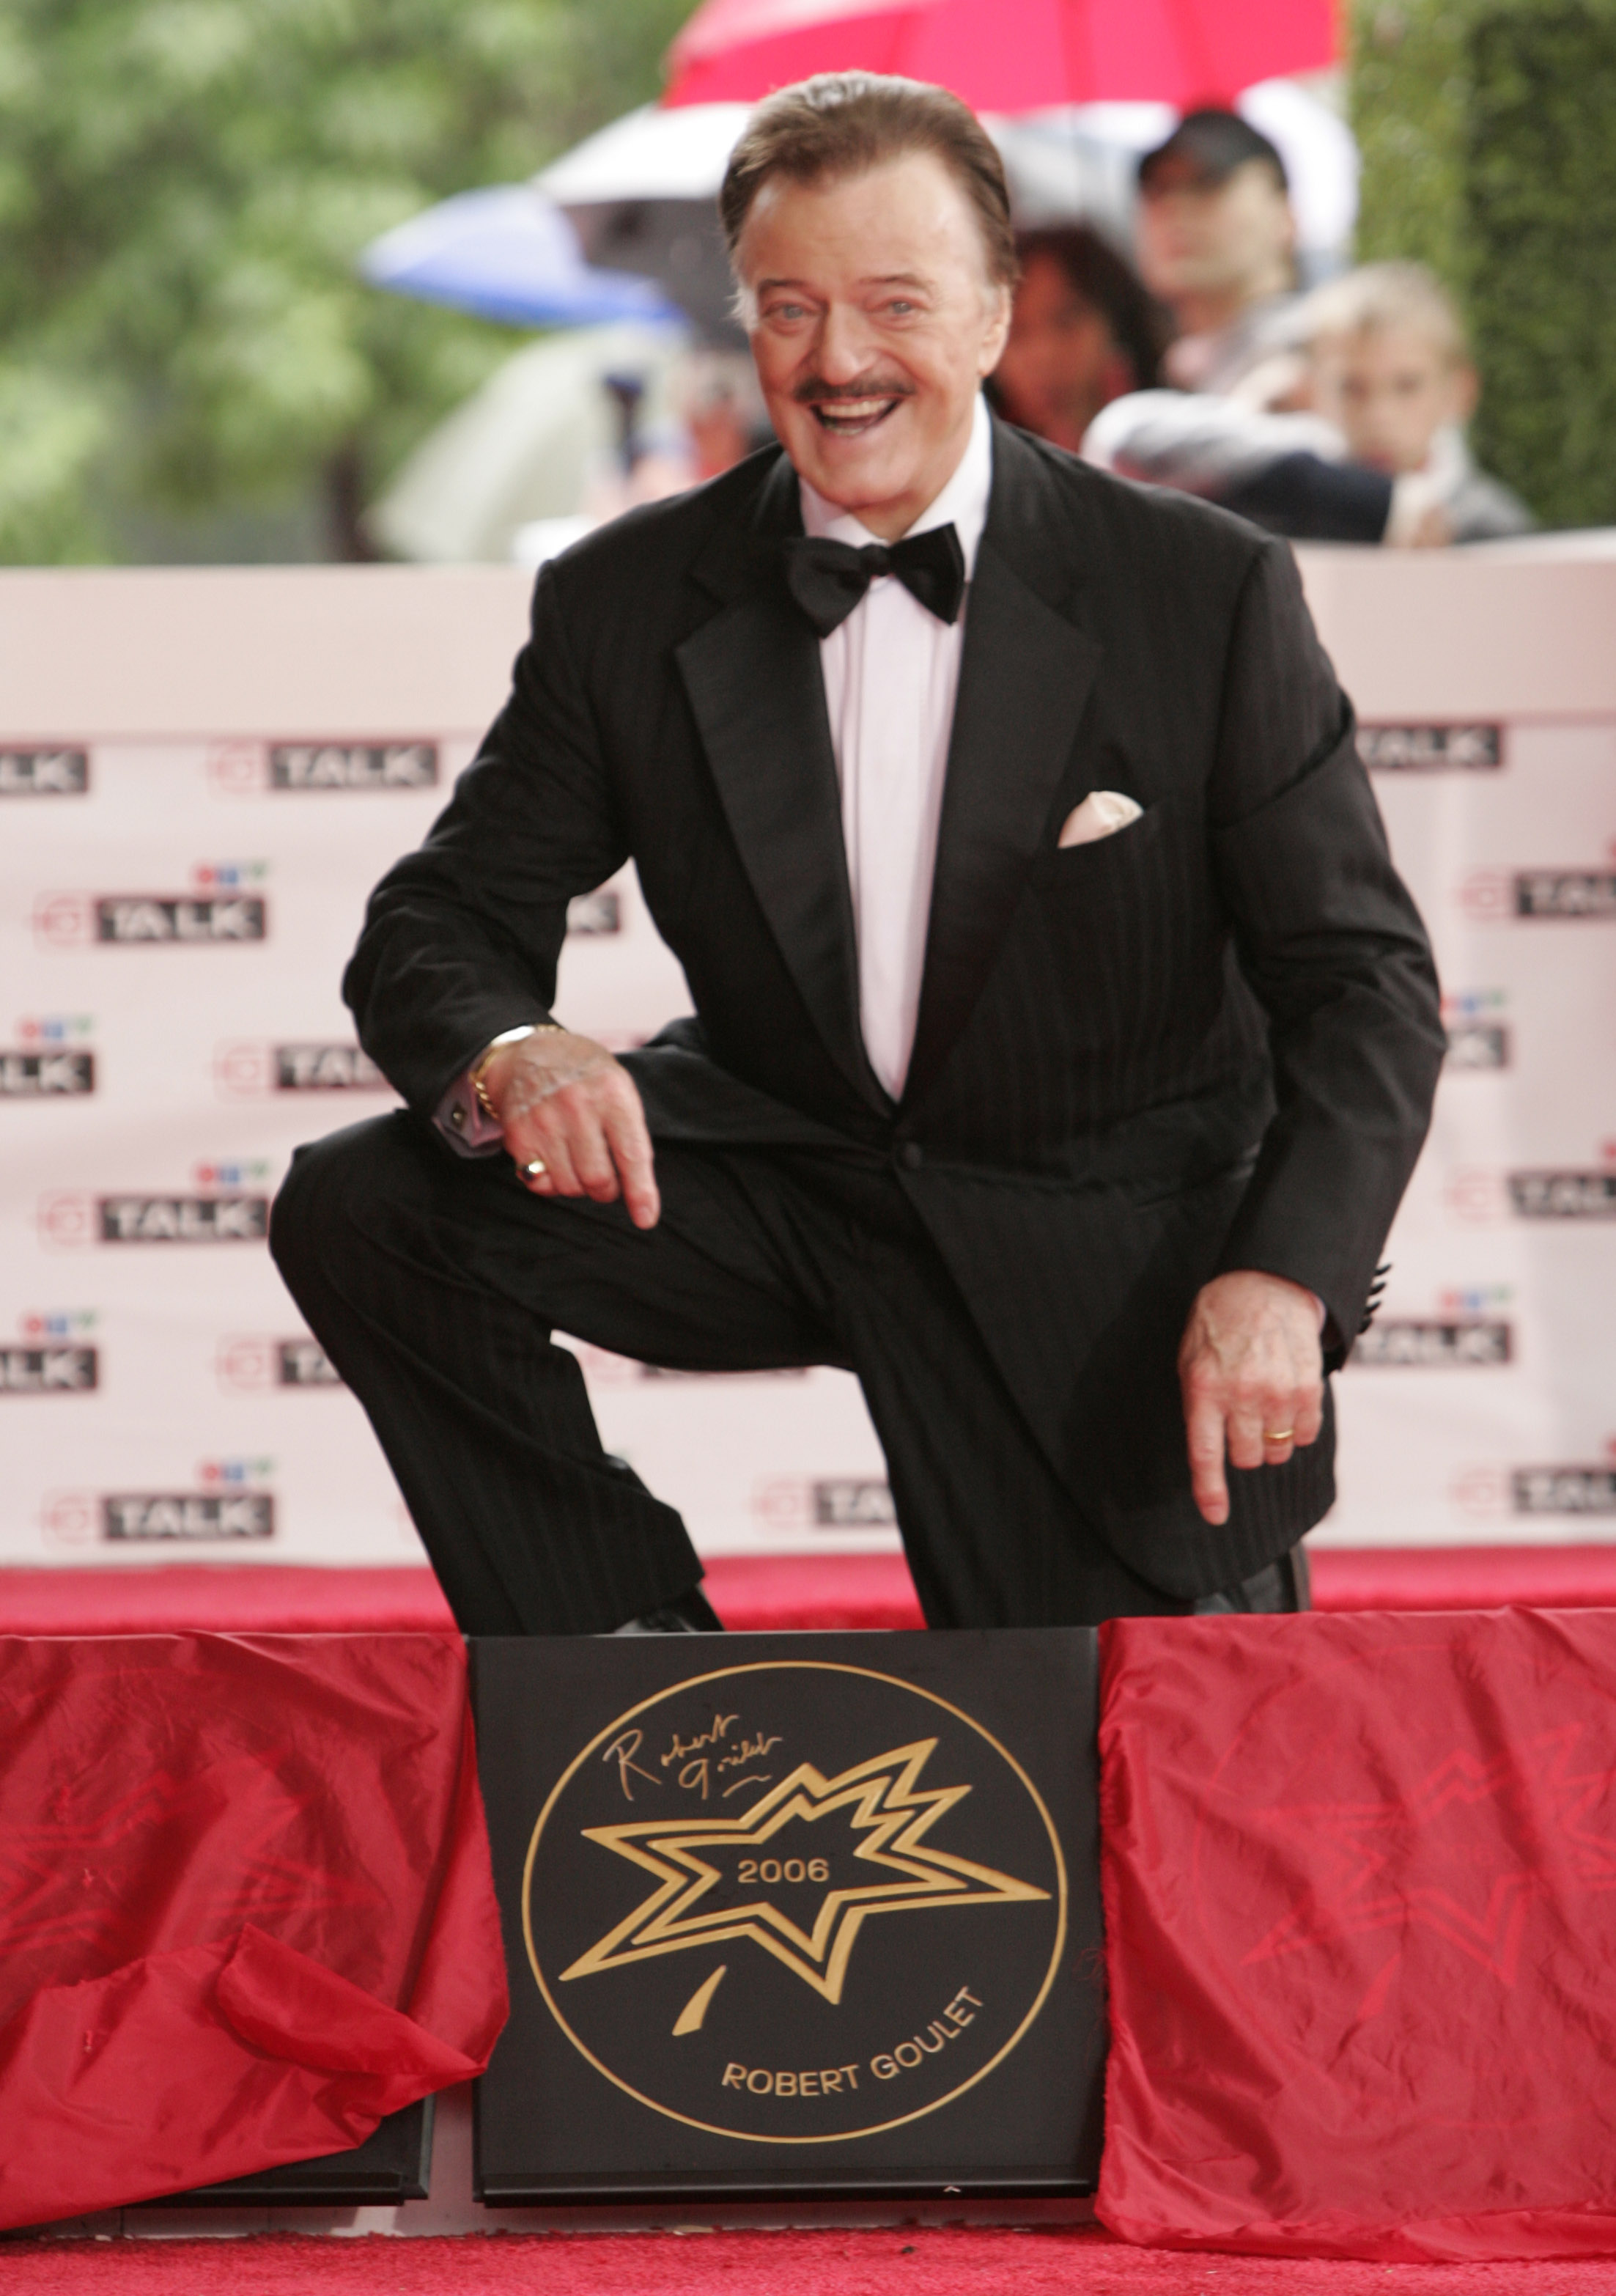 Robert Goulet - Star on Canada's Walk of Fame (2006)